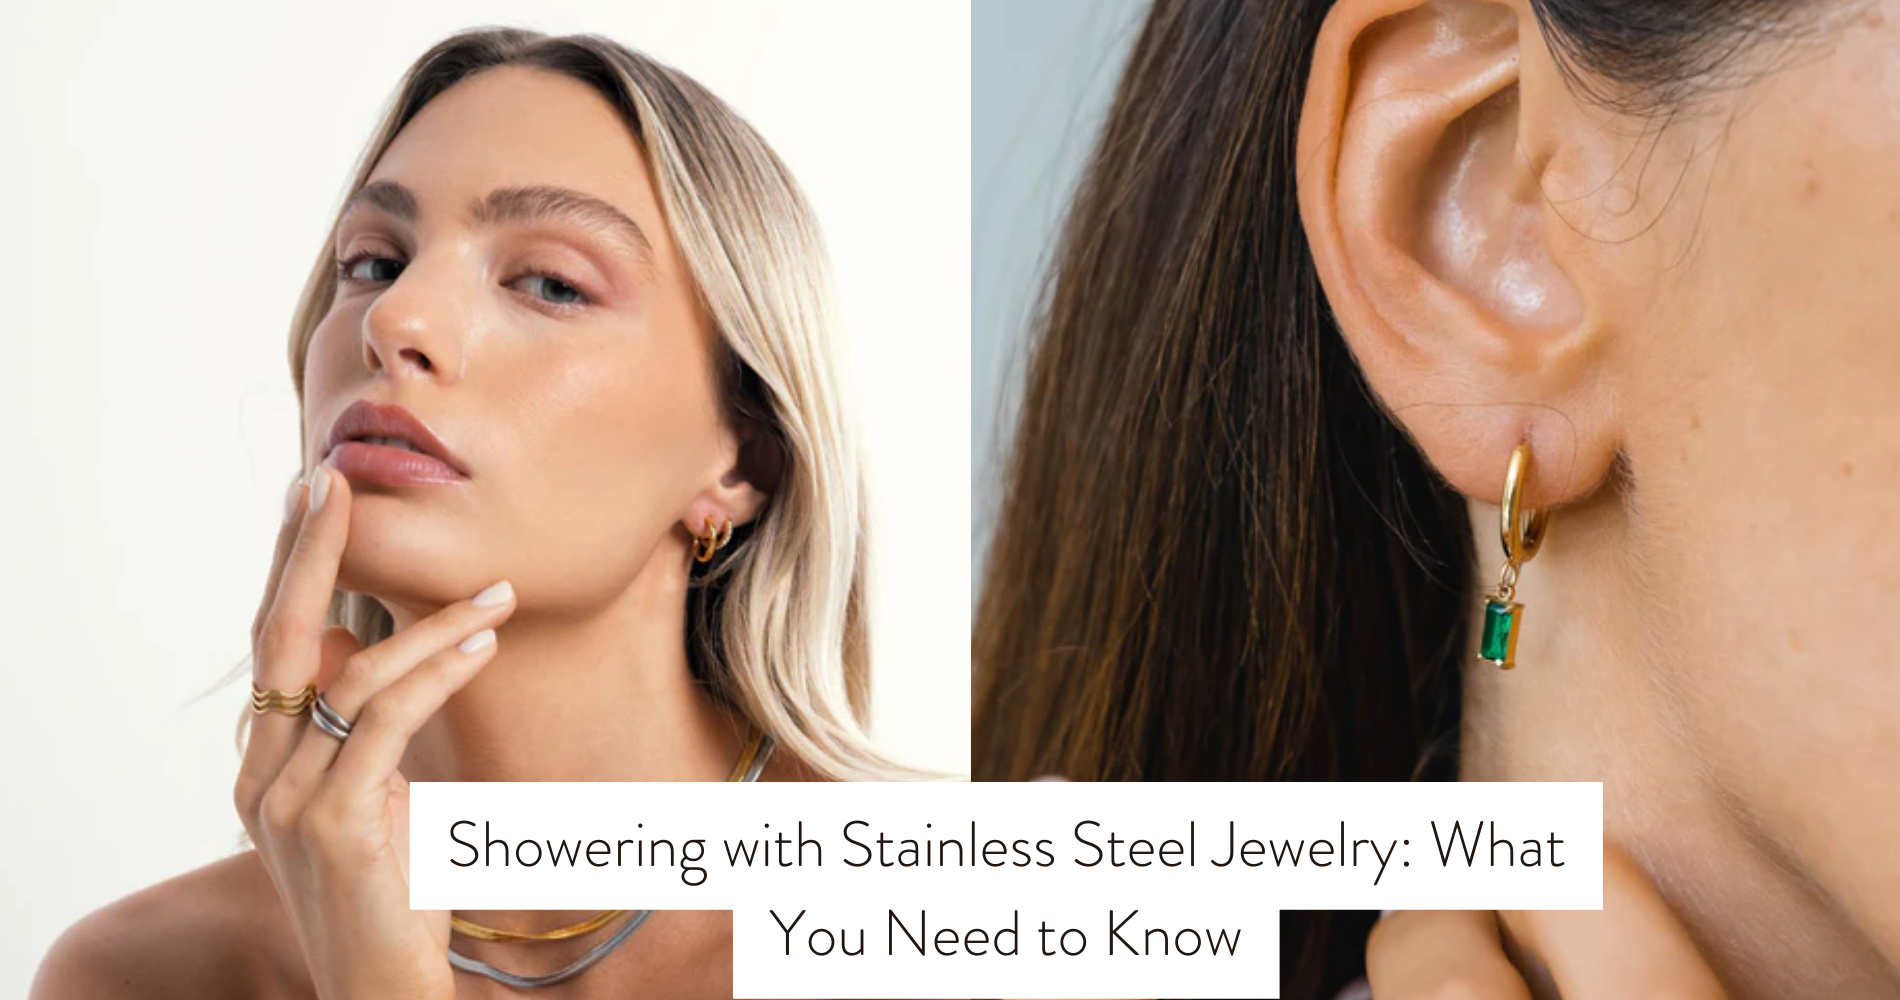 can you shower with stainless steel jewelry